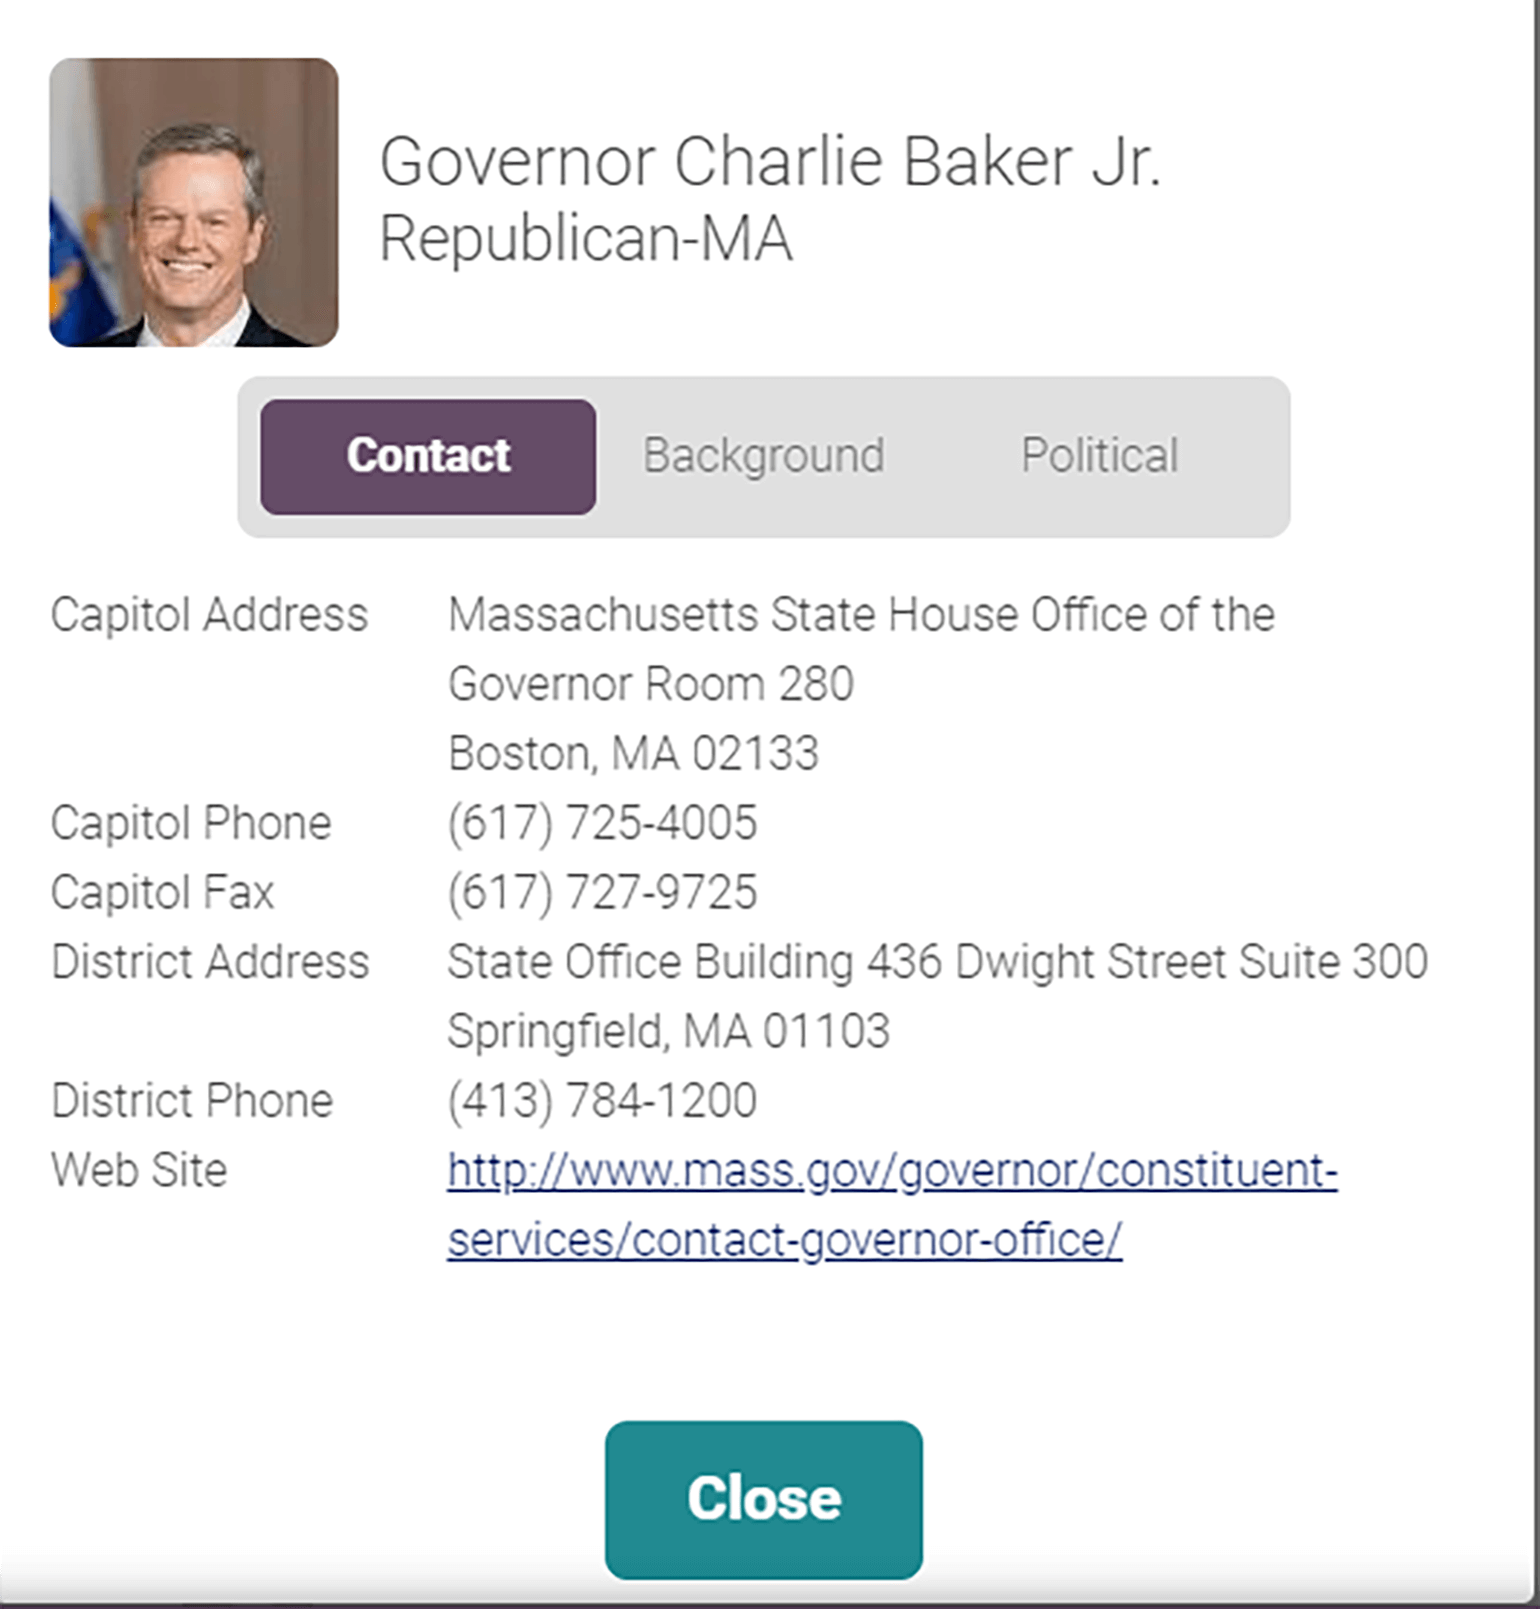 An image of Governor Charlie Baker Jr.’s profile on fiscalnote. There is a picture of his face in the top left corner. There are buttons to shift between his contact information, his background, and his political stances, the contact button is active. His contact information is listed.